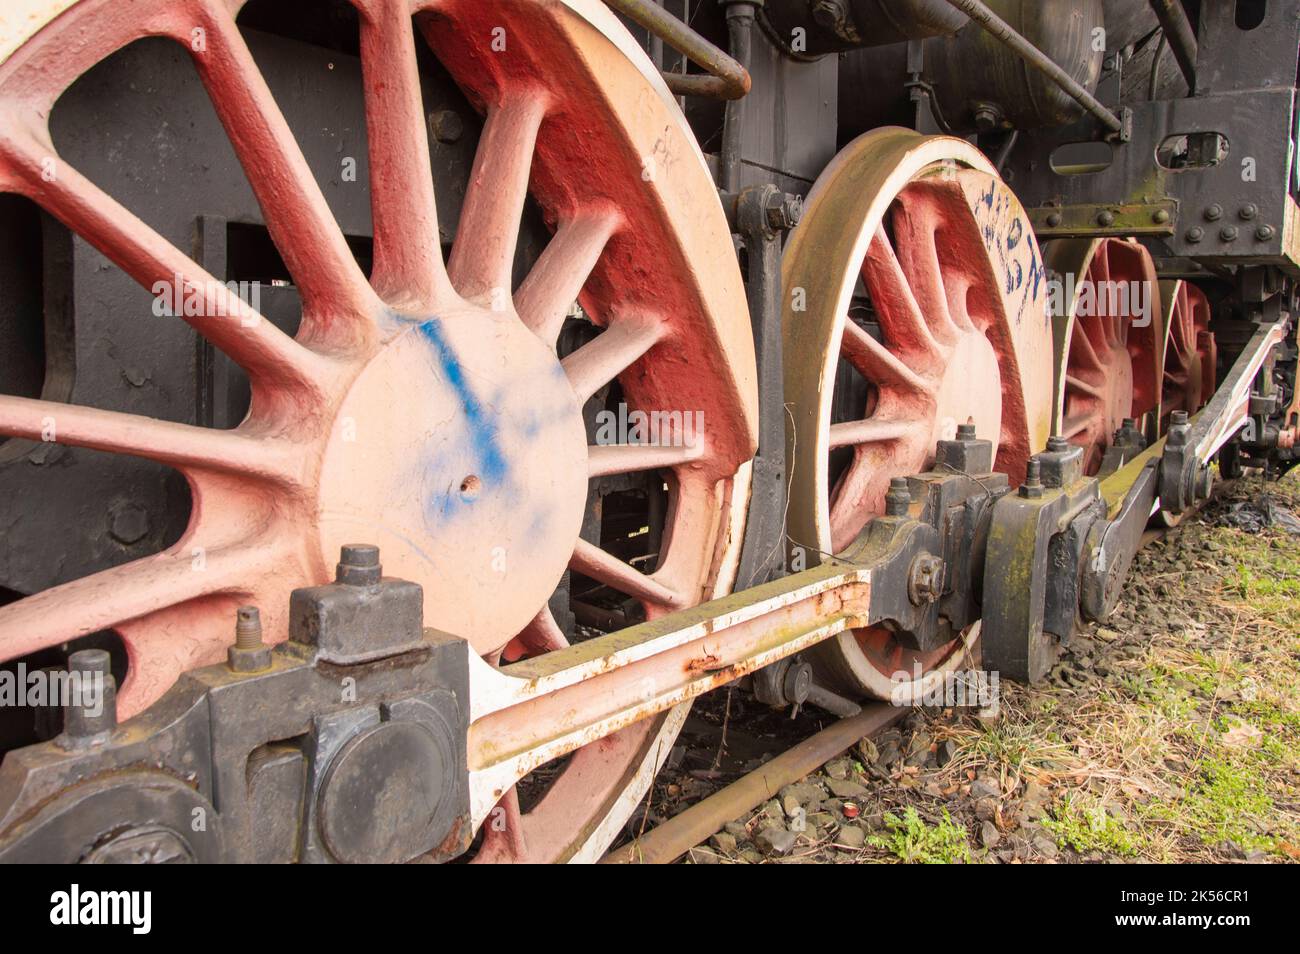 Drive transmission mechanism in a historic and damaged steam locomotive standing on a sidetrack. Stock Photo